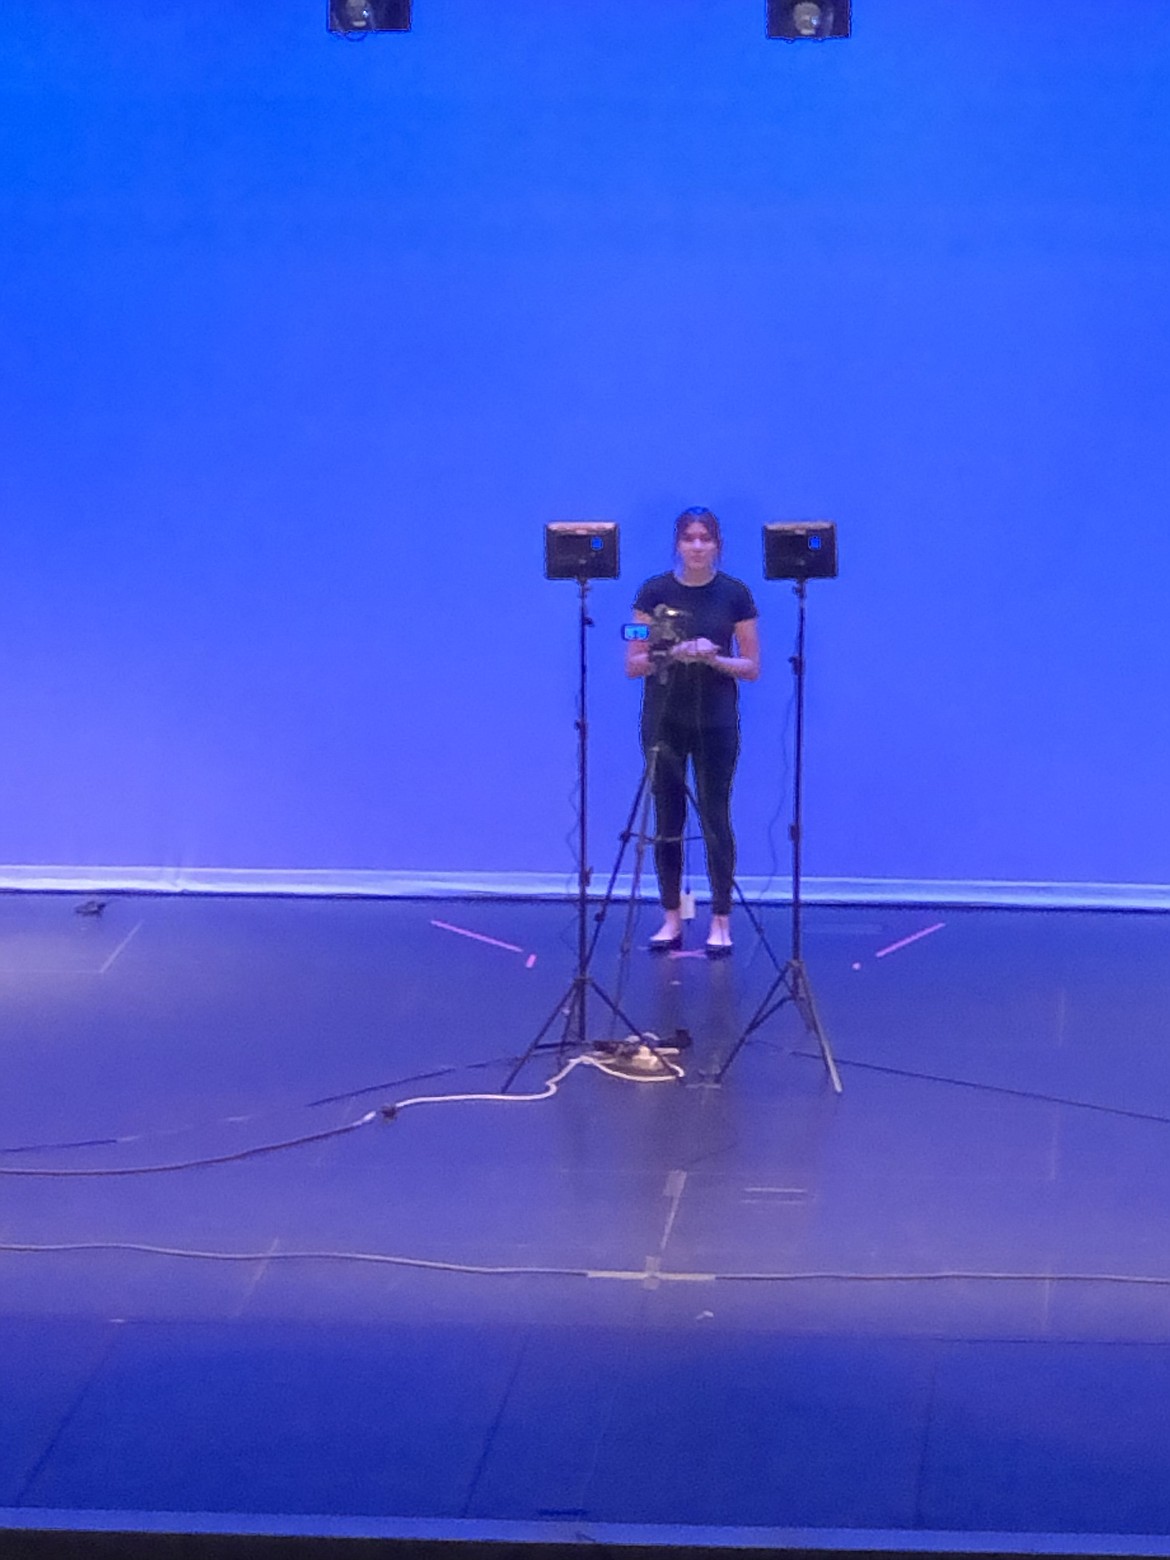 Stephanie Sanchez and the rest of the cast of the Quincy High School production "Paciencia y Fe" performed alone in an empty theater, one of the many challenges presented by the coronavirus outbreak.